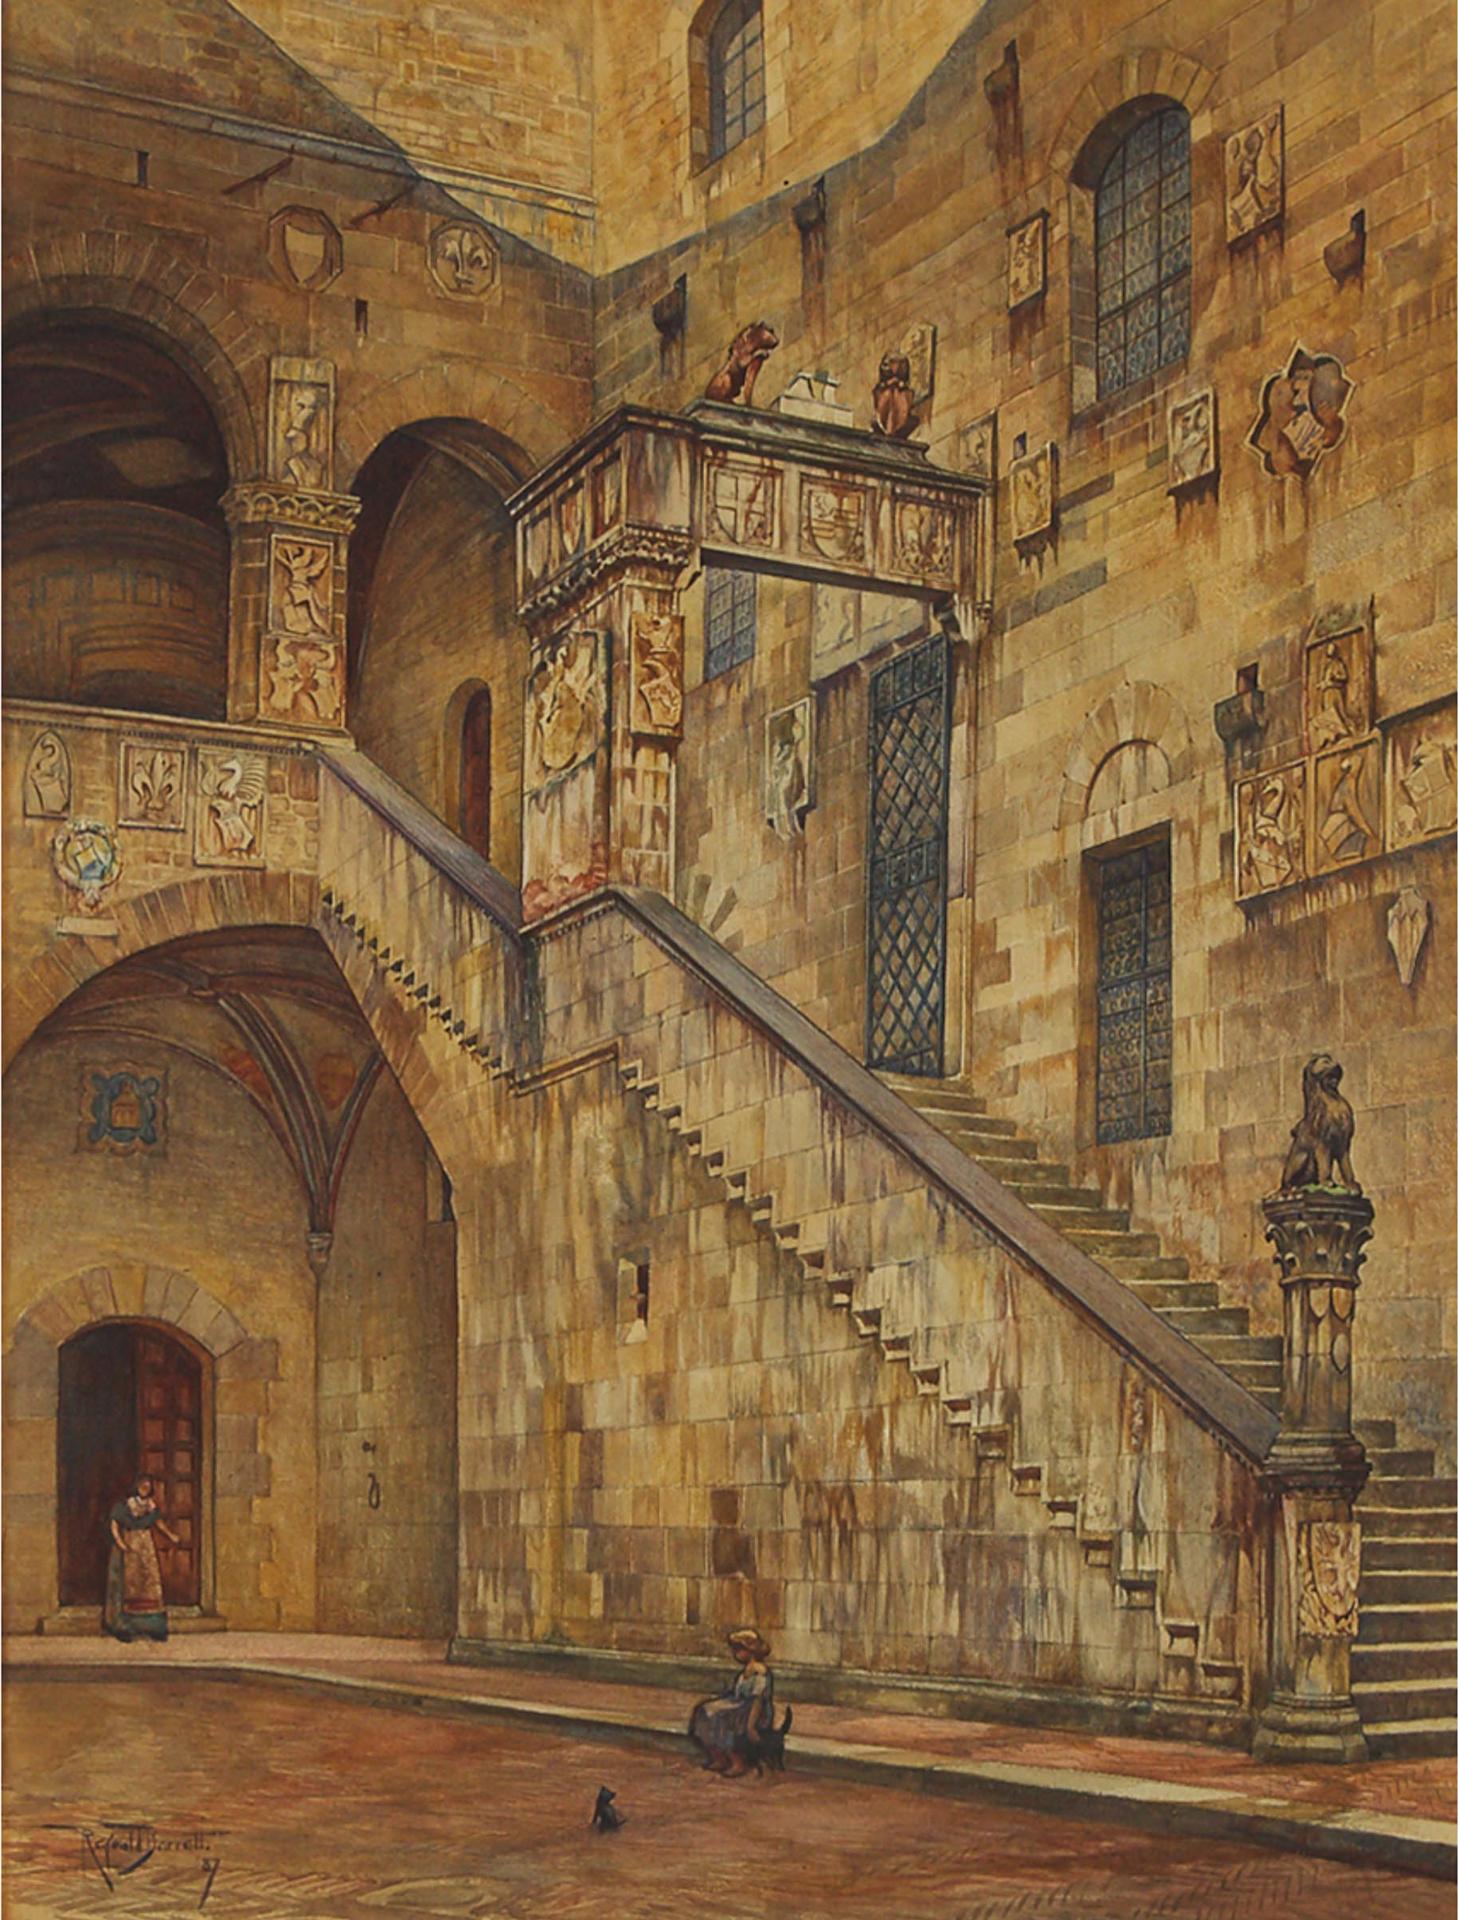 Reginald Barratt (1861-1917) - Palazzo Del Bargello, Florence (A Girl With Cats On The Step), 1887